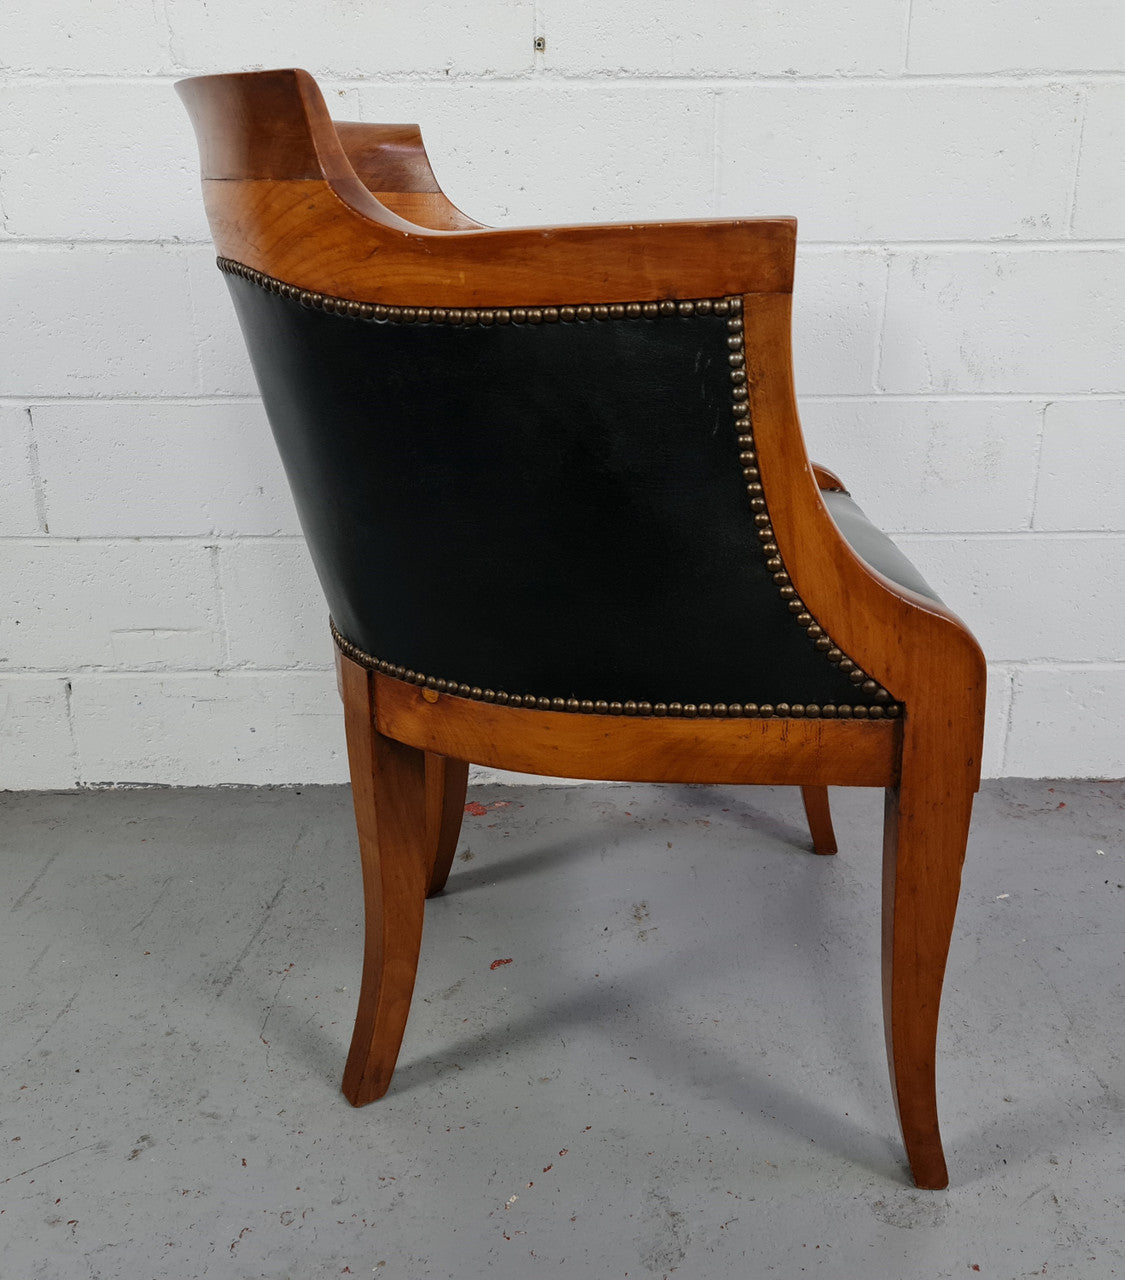 Antique Empire style Walnut and leather office desk chair. In good original detailed condition and leather is in good used condition.